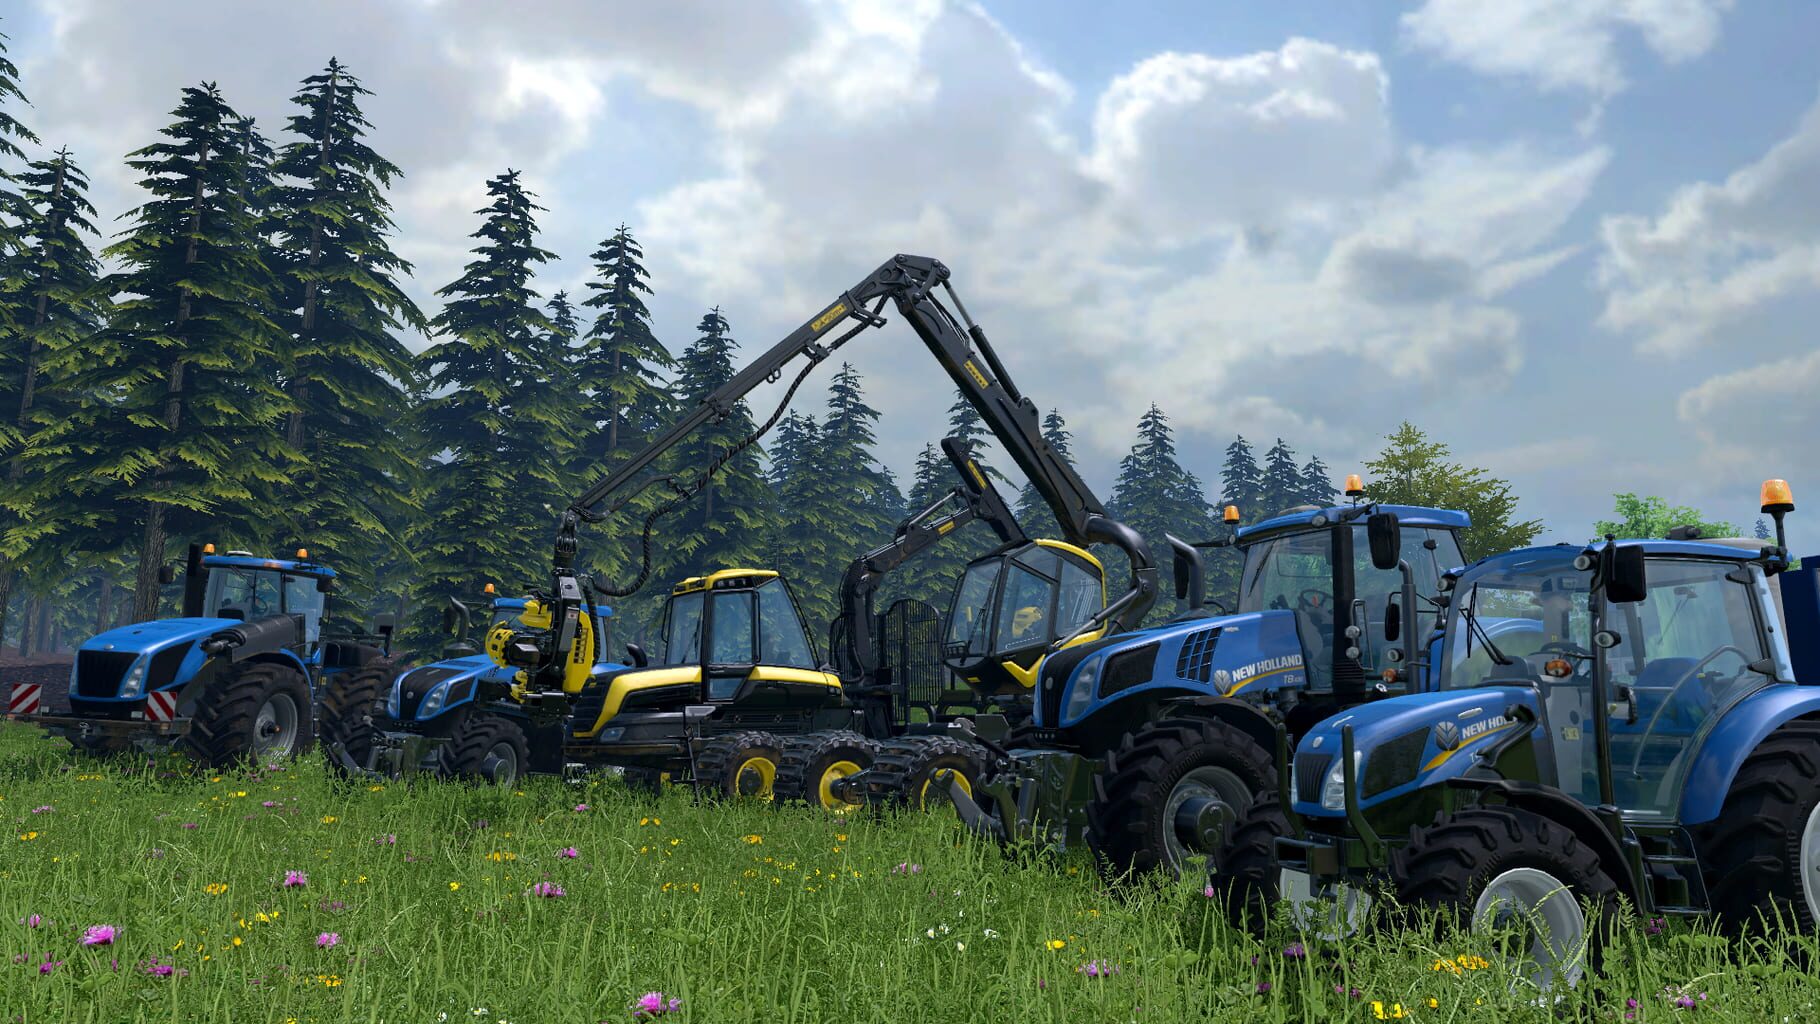 Cheat Codes For Farming Simulator 15 How To Get Unlimited Money On FS19 Pc Only YouTube